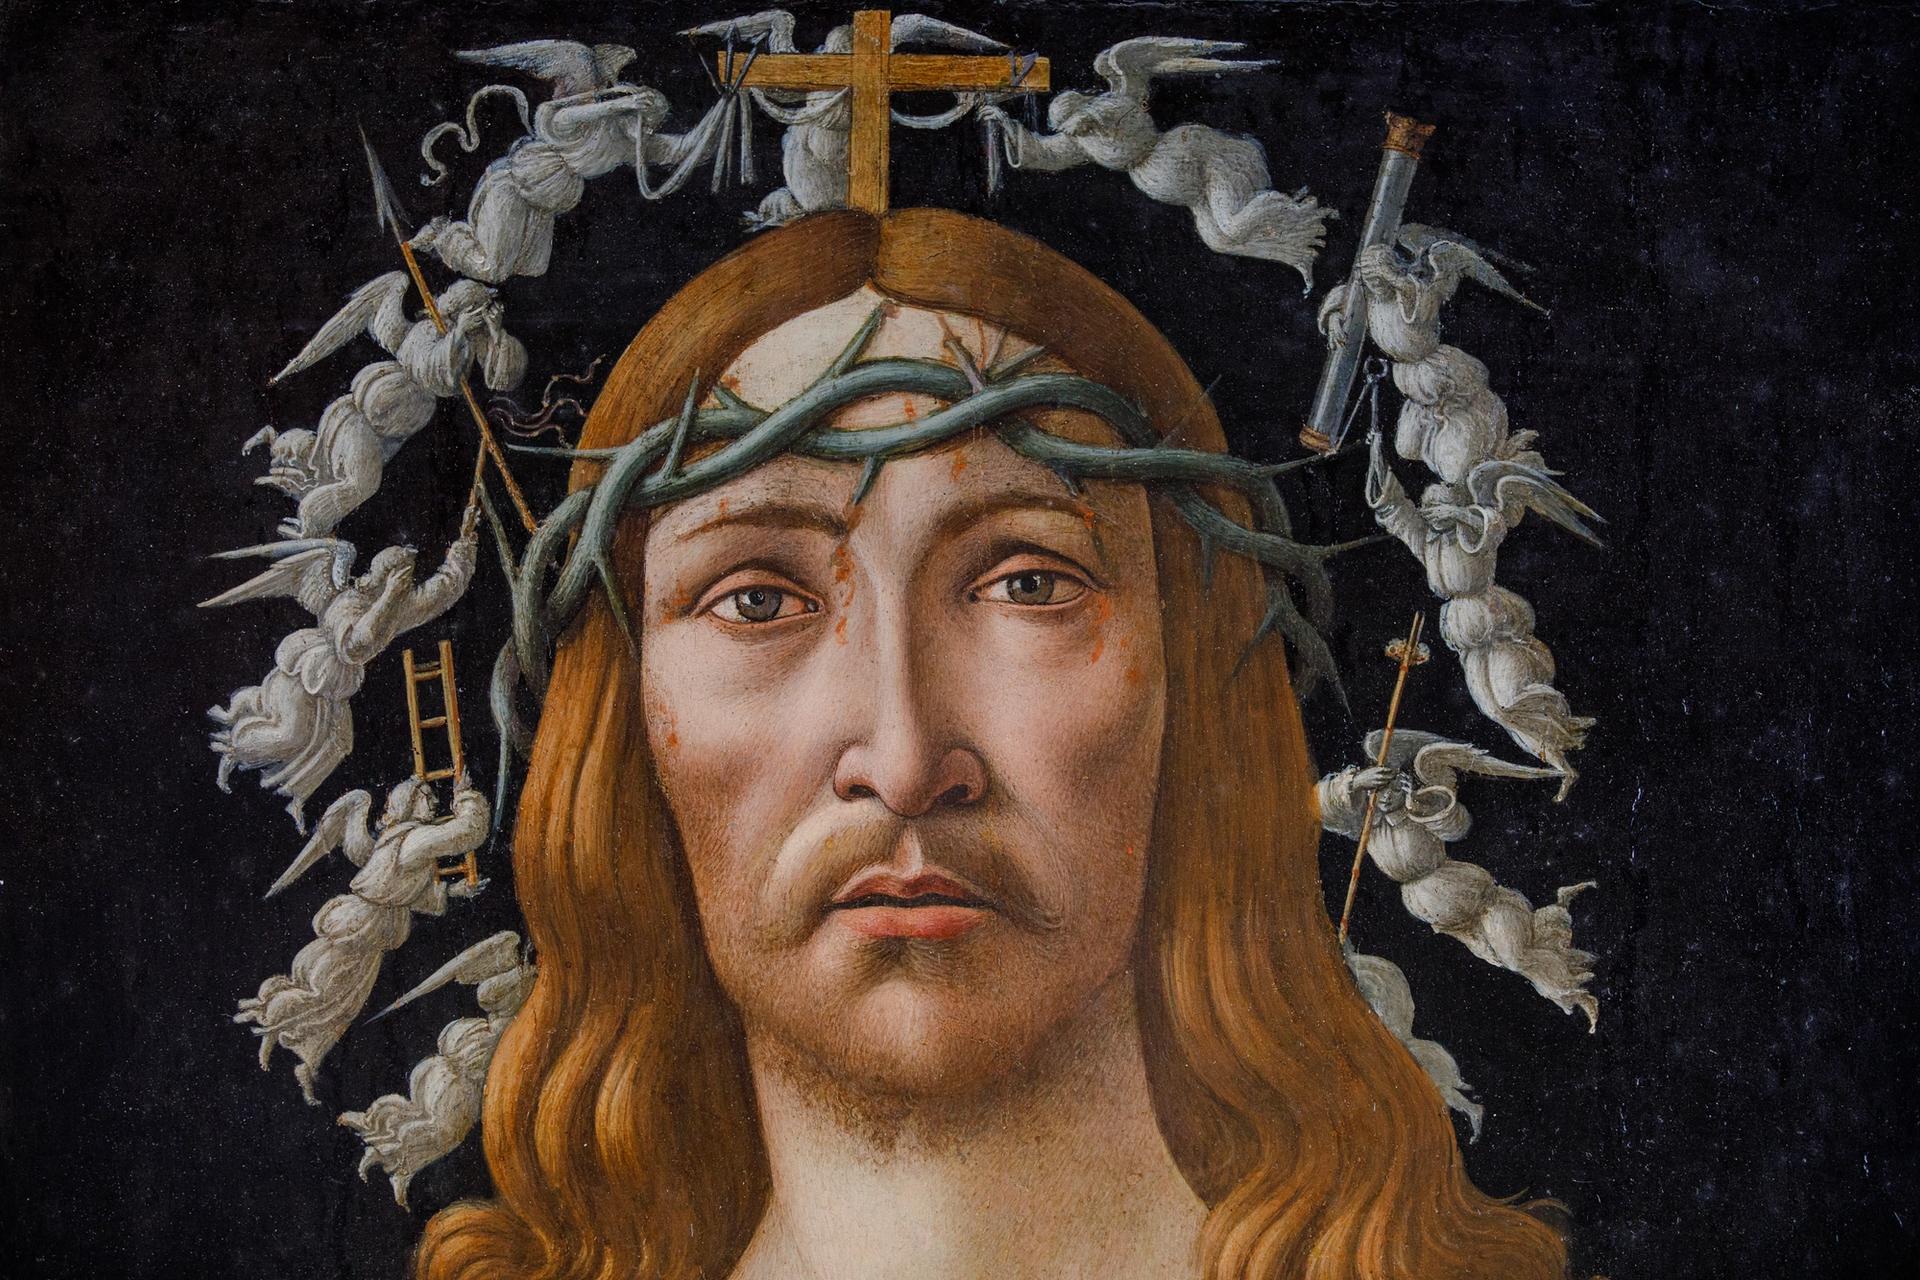 Botticelli's Man of Sorrows (detail)

Courtesy of Sotheby's